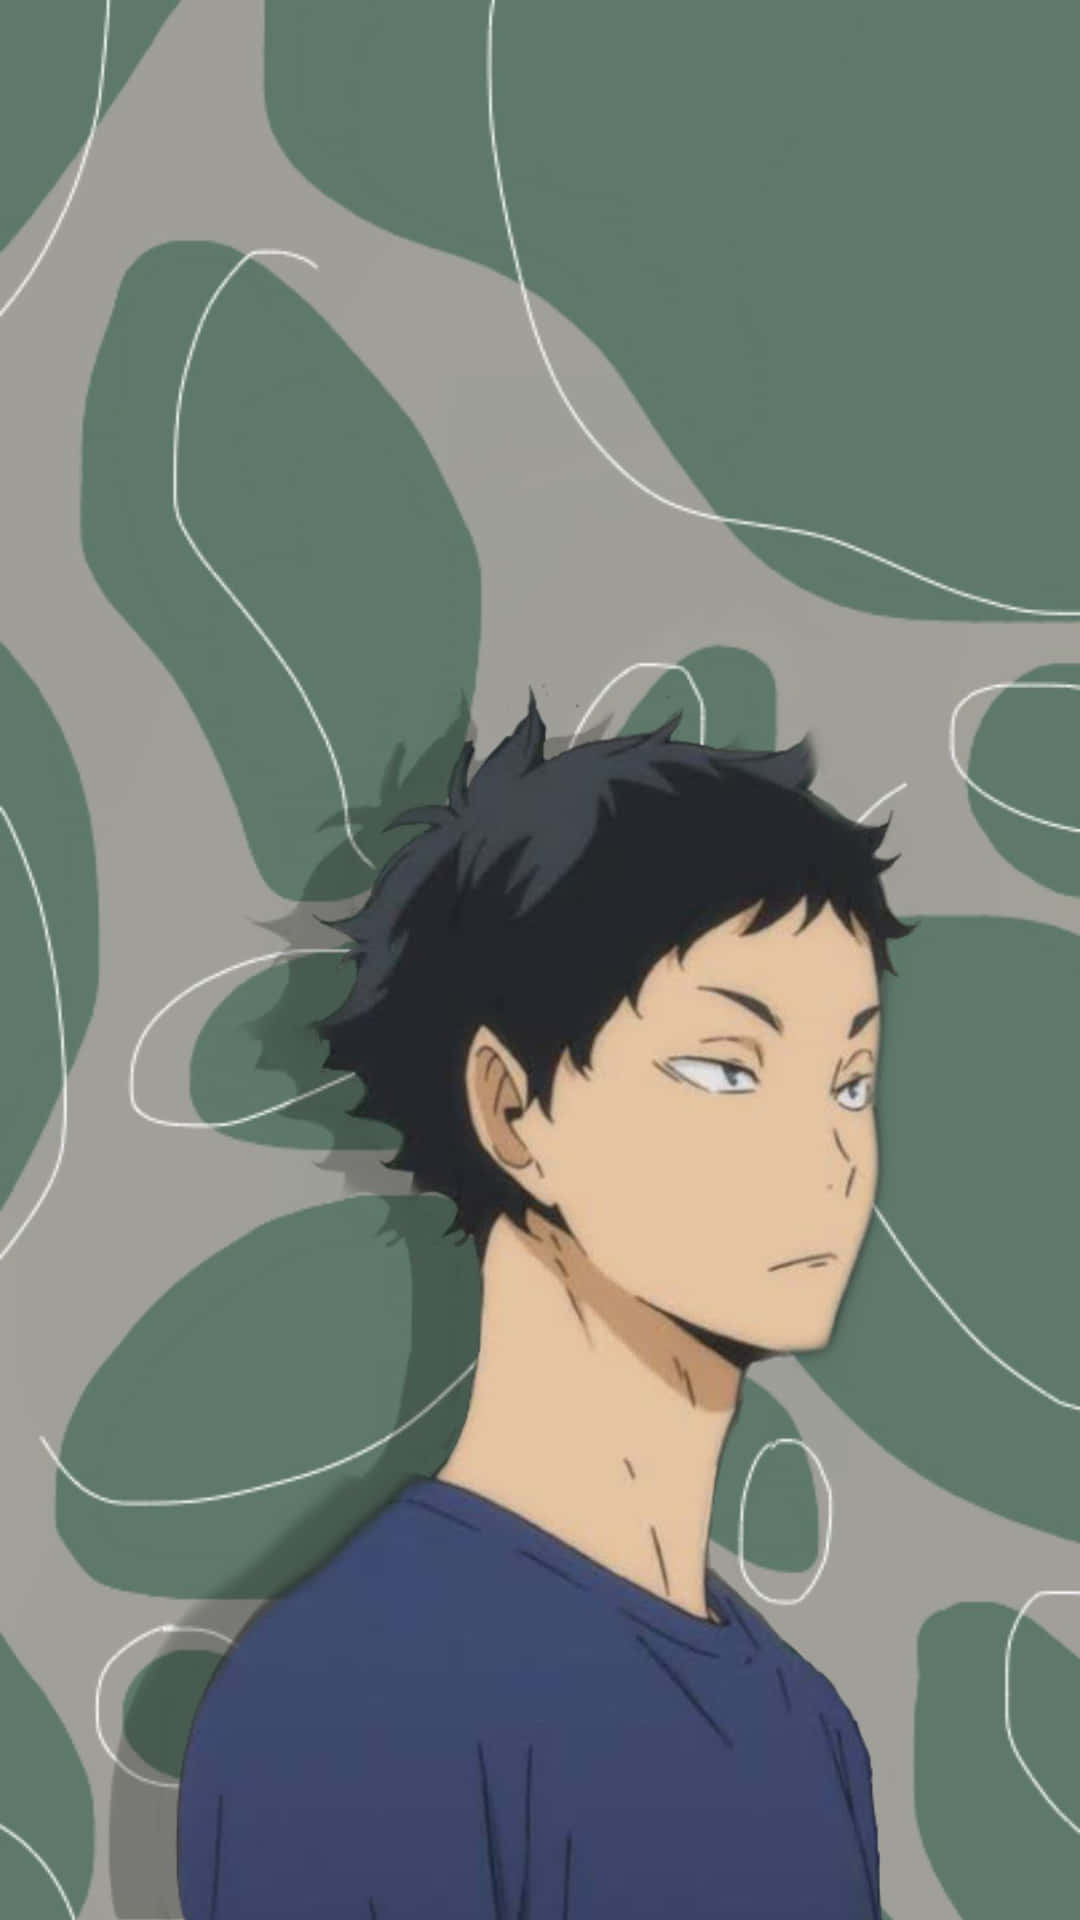 Keiji Akaashi striking a cool pose in his volleyball uniform Wallpaper